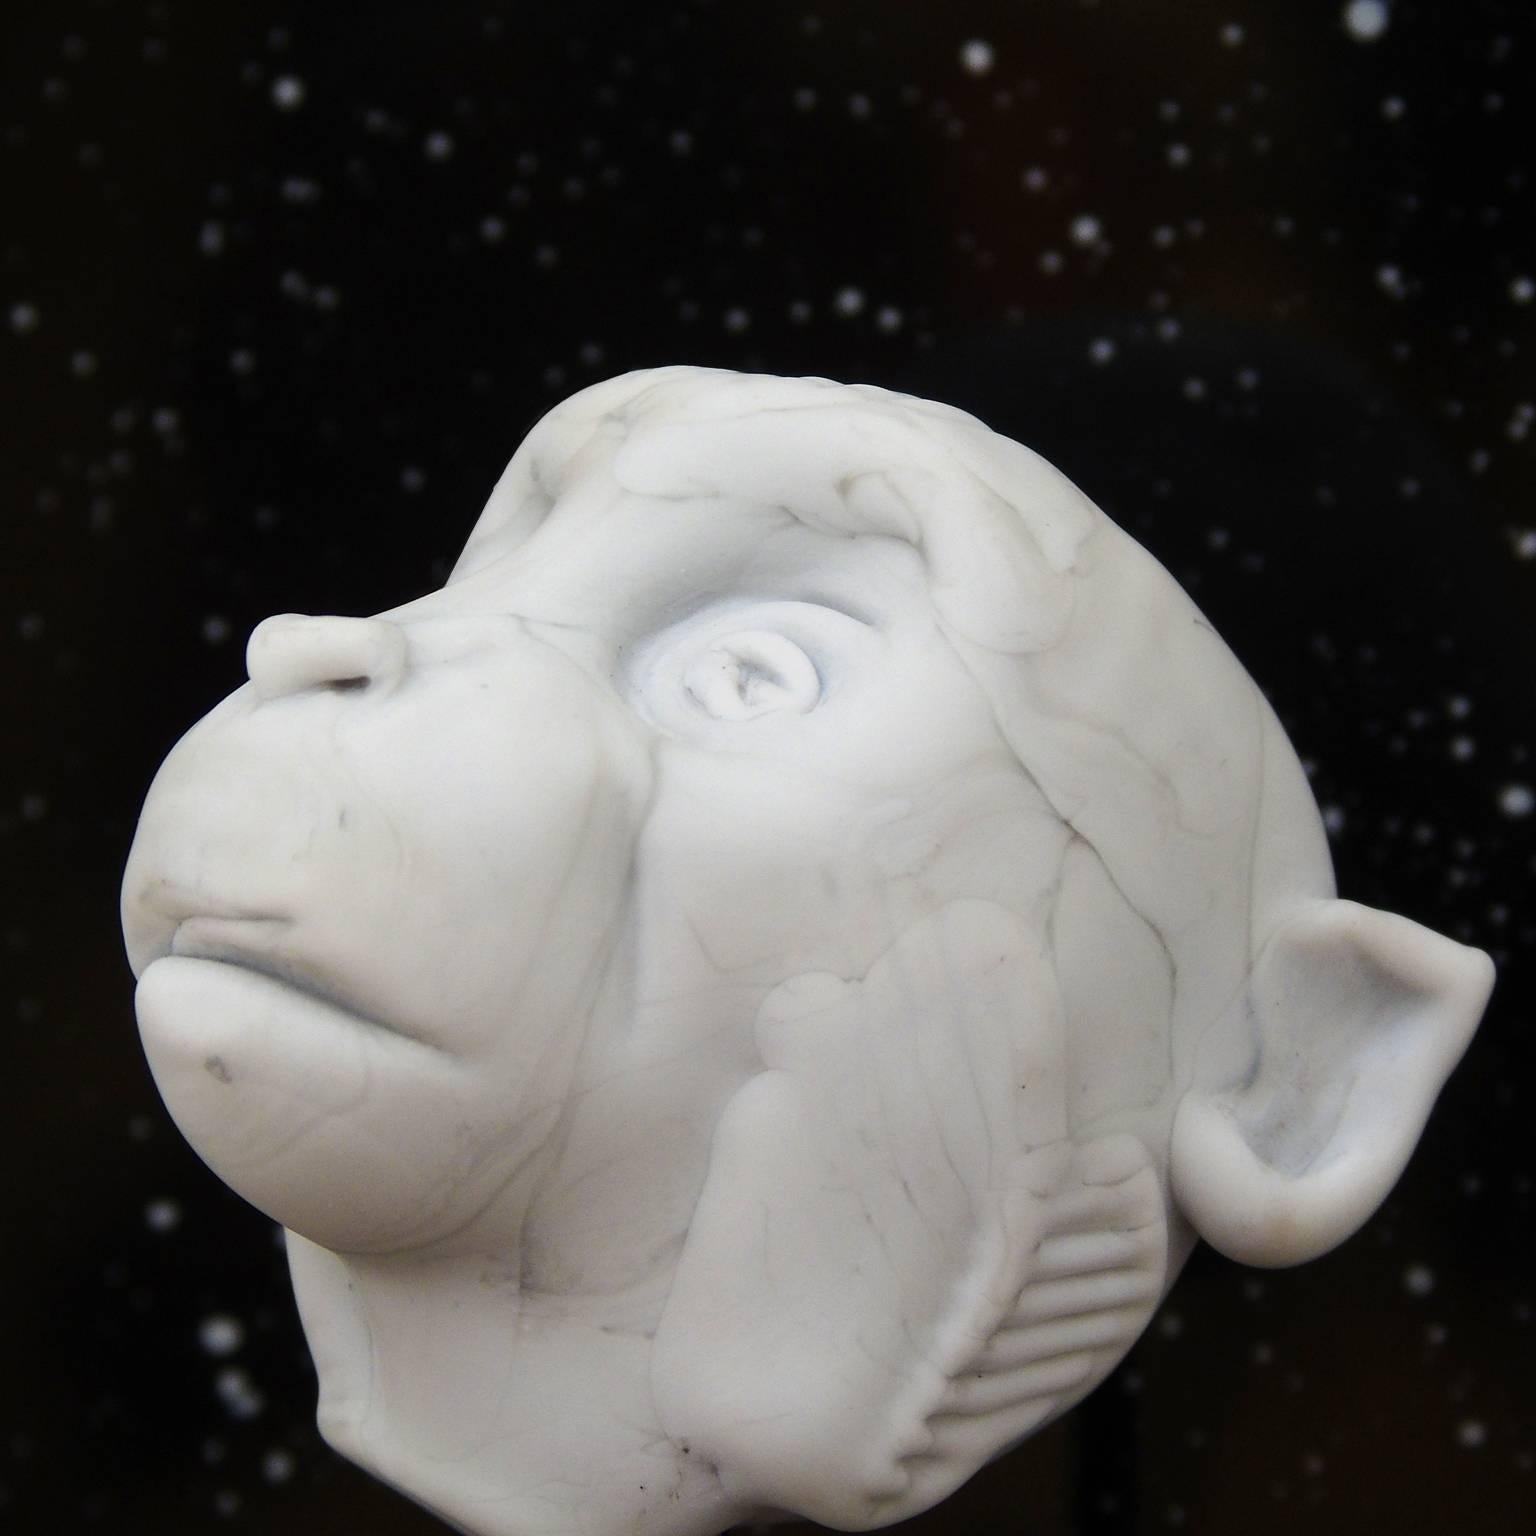 Albert I, by Marshall Hyde, is a portrait of the first primate astronaut. It is a one of a kind piece created from hot, flameworked glass. The white glass has some color variation and has been etched giving it the look of marble. The glass head is